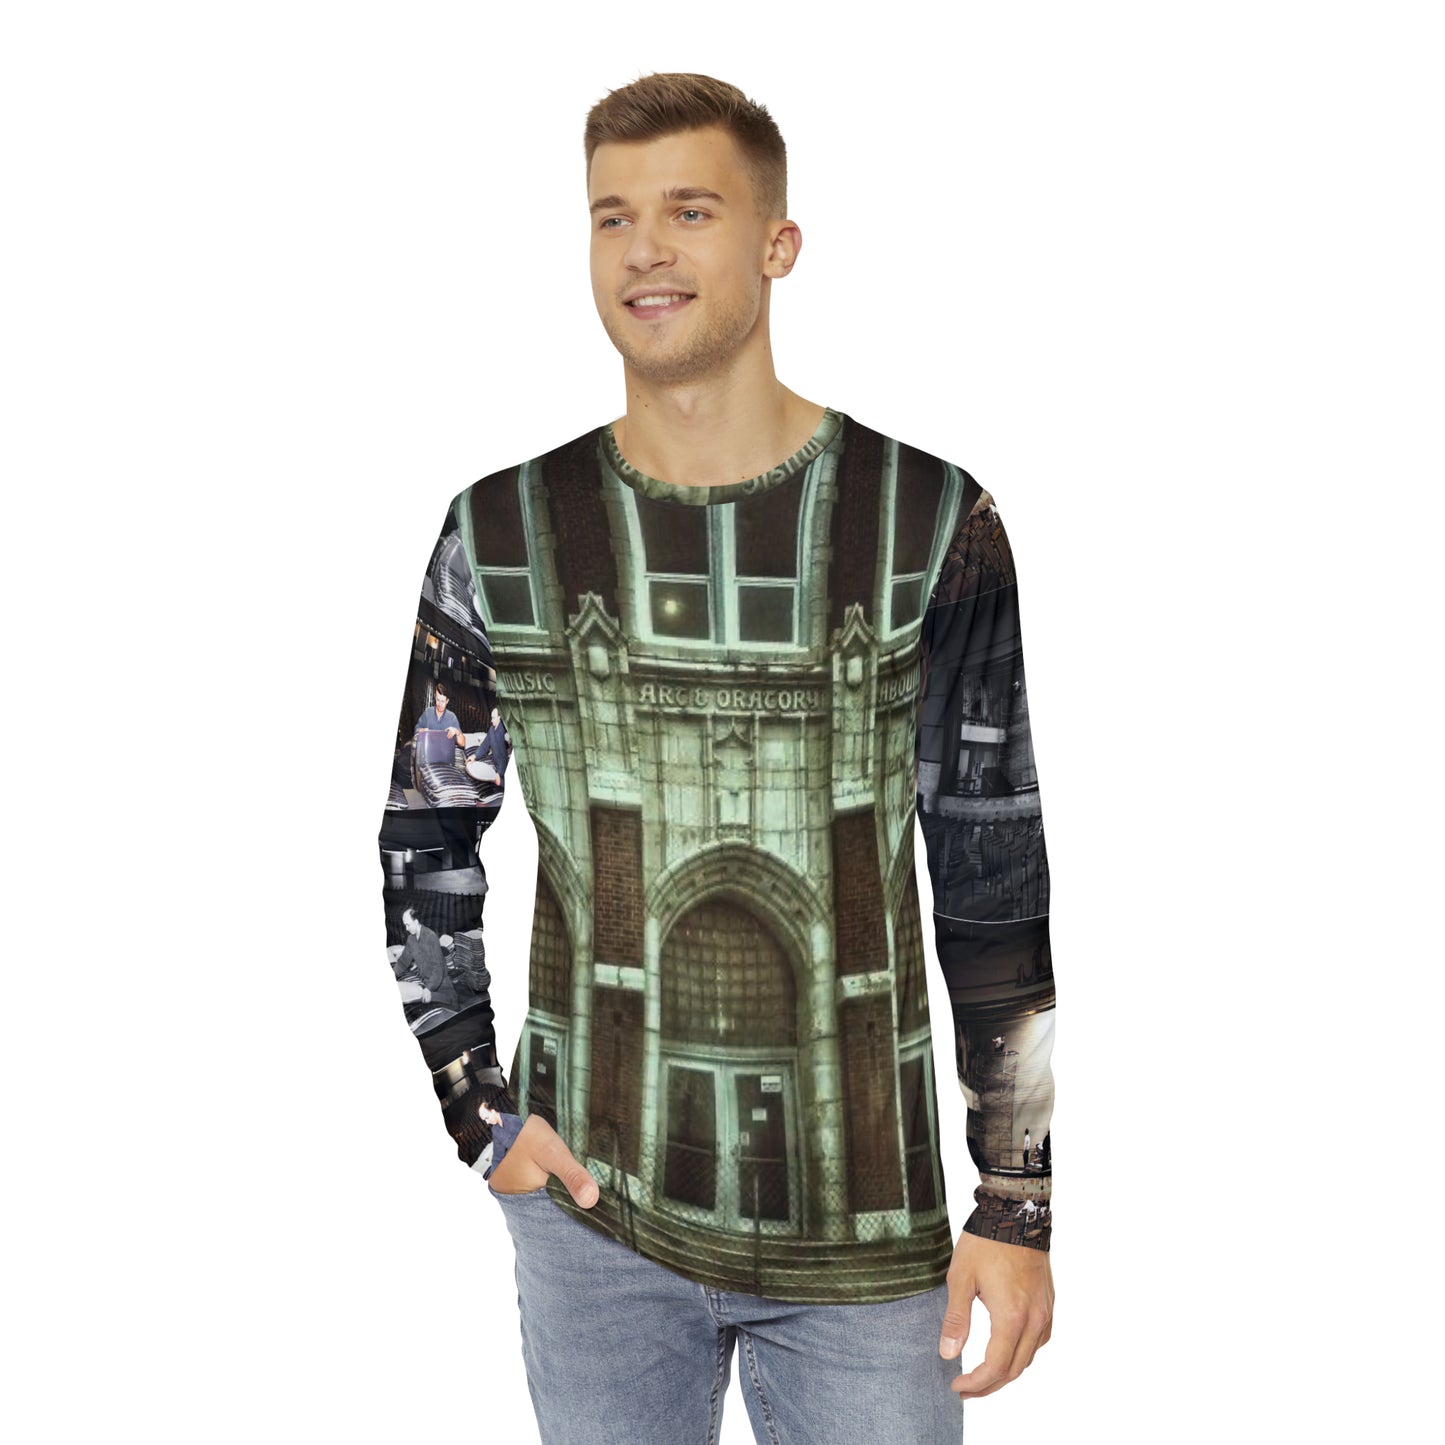 Let Music Art & Oratory Abound Within Central Auditorium Men's Long Sleeve Shirt (AOP)